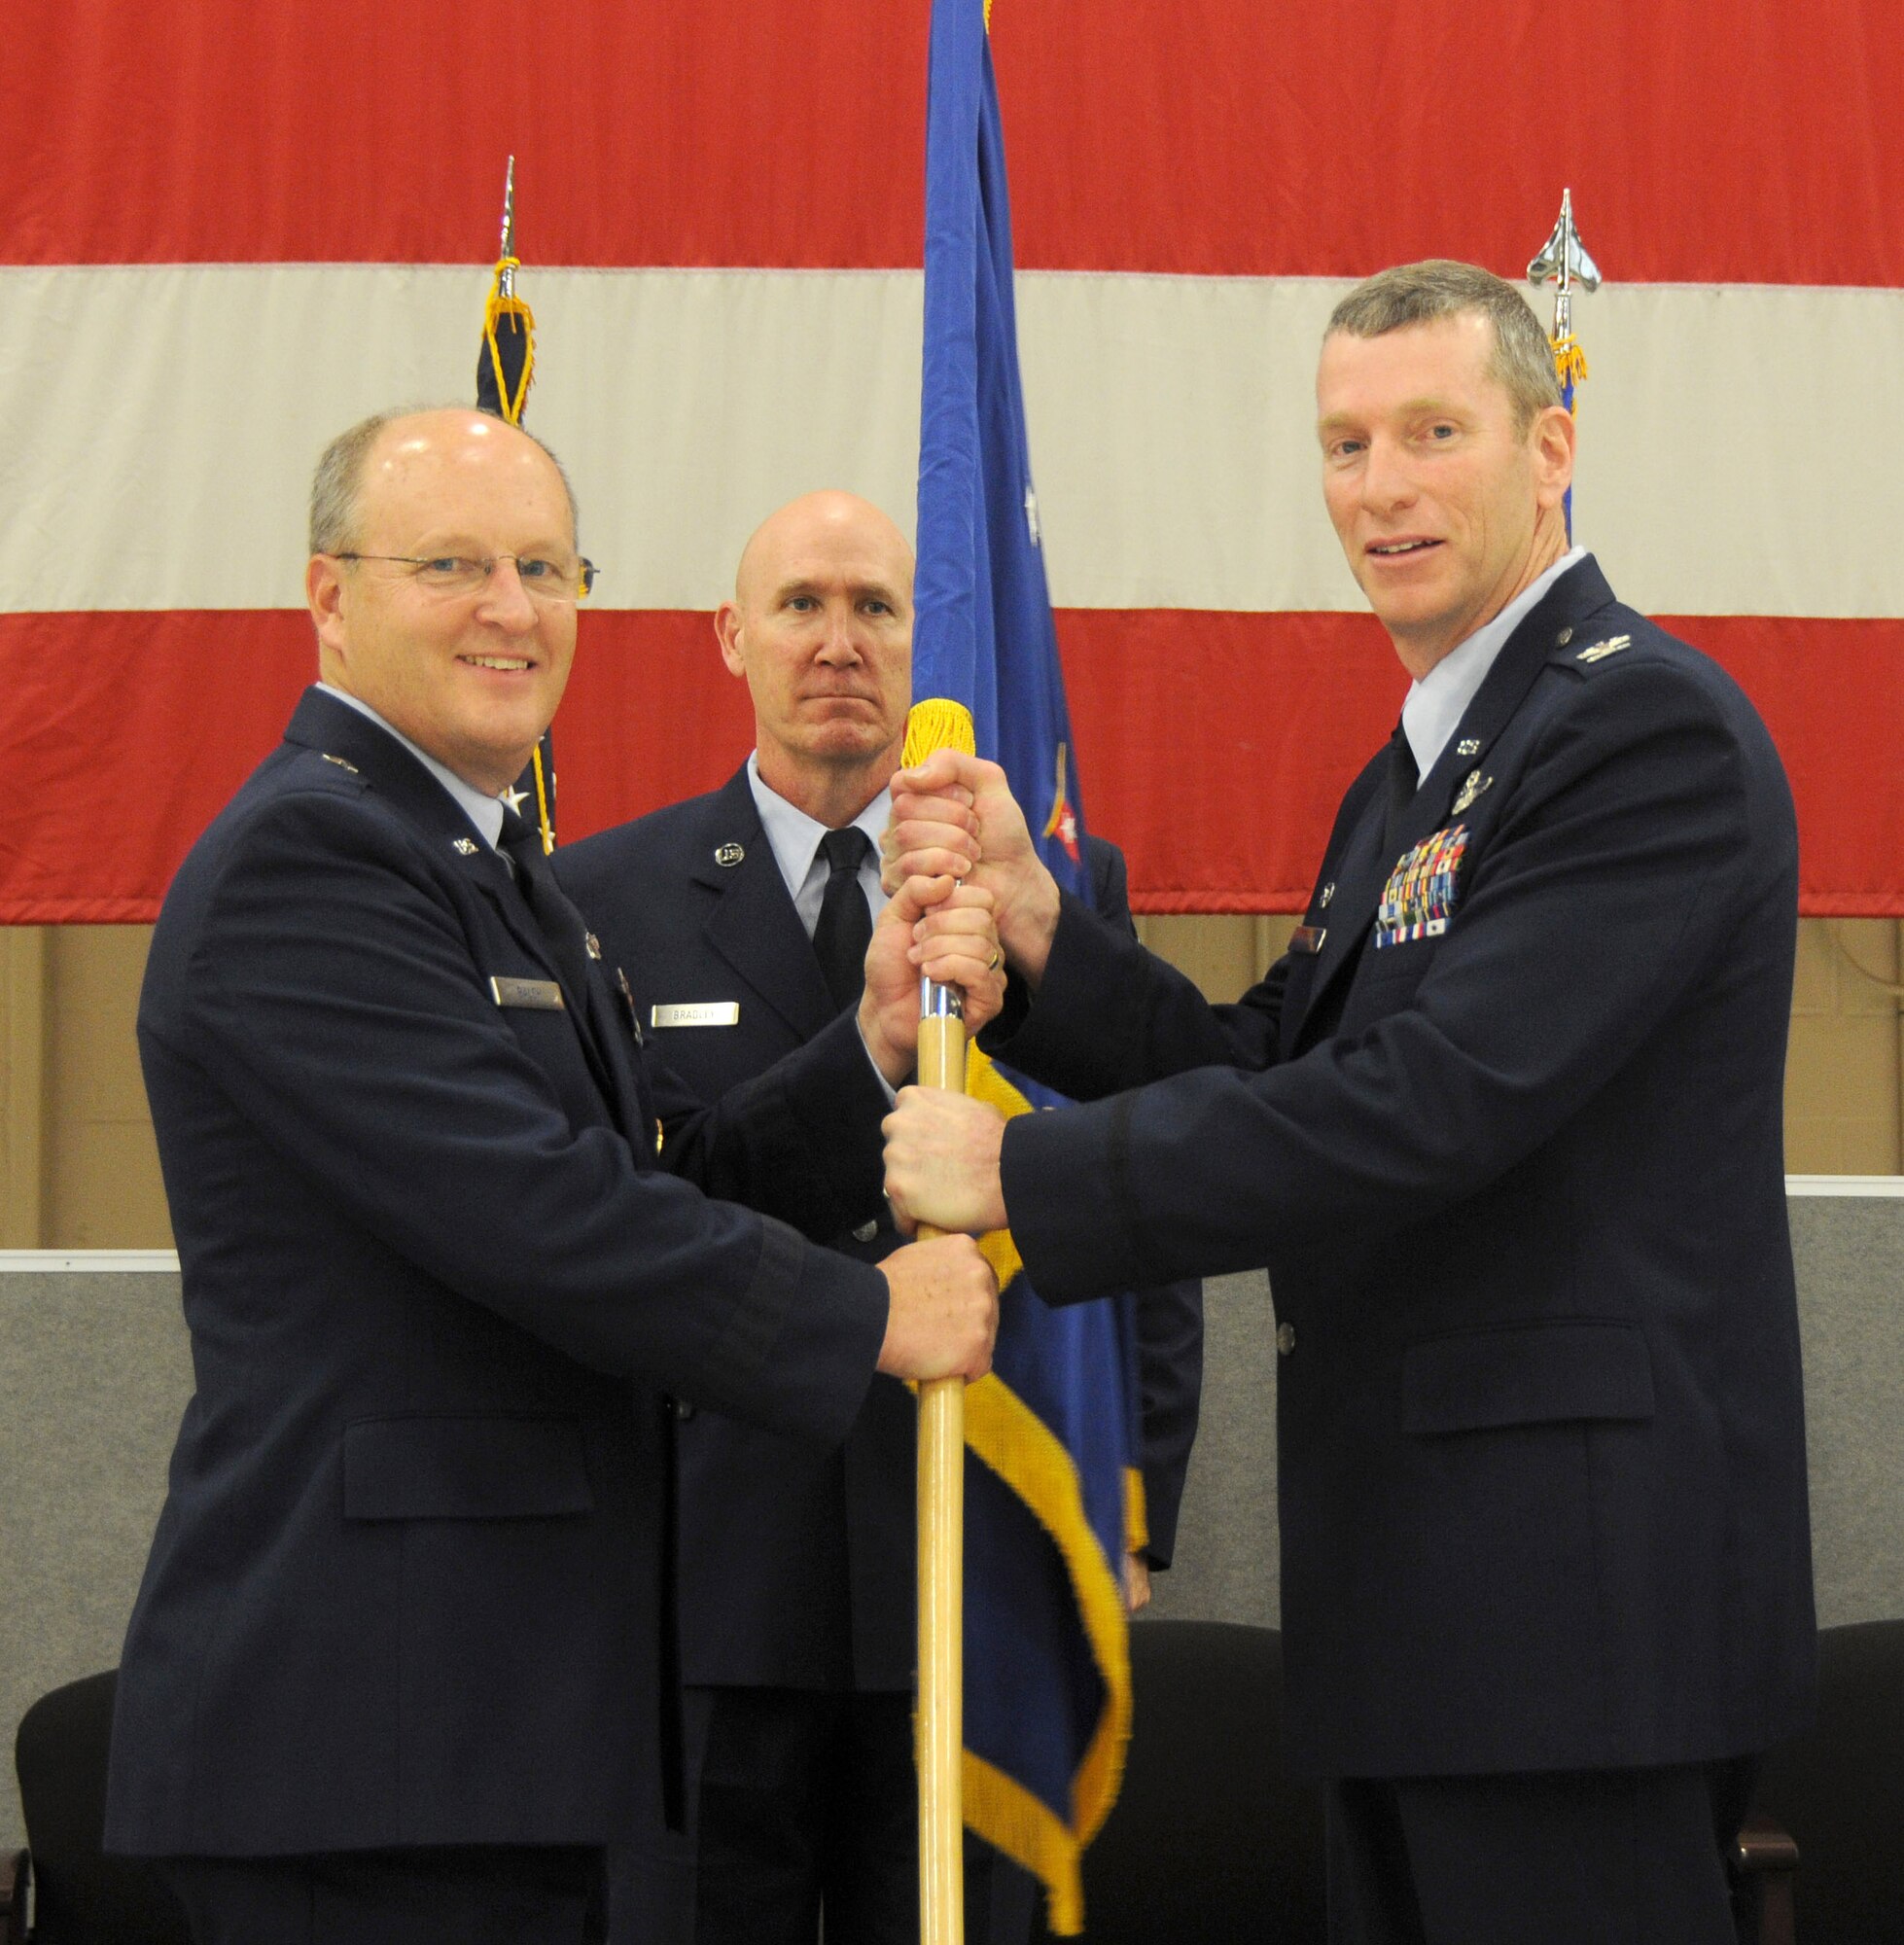 Col. Mark Anderson hands the guidon to Brig. Gen. Dwight Balch, commander of the Air National Guard, during a change of command ceremony held at Ebbing Air National Guard Base, Fort Smith, Ark., Jan. 11, 2015. Anderson relinquished command of the 188th Wing to Col. Bobbi Doorenbos, former commander of the 214th Reconnaissance Group, during the ceremony. (U.S. Air National Guard photo by Airman 1st Class Cody Martin/released) 